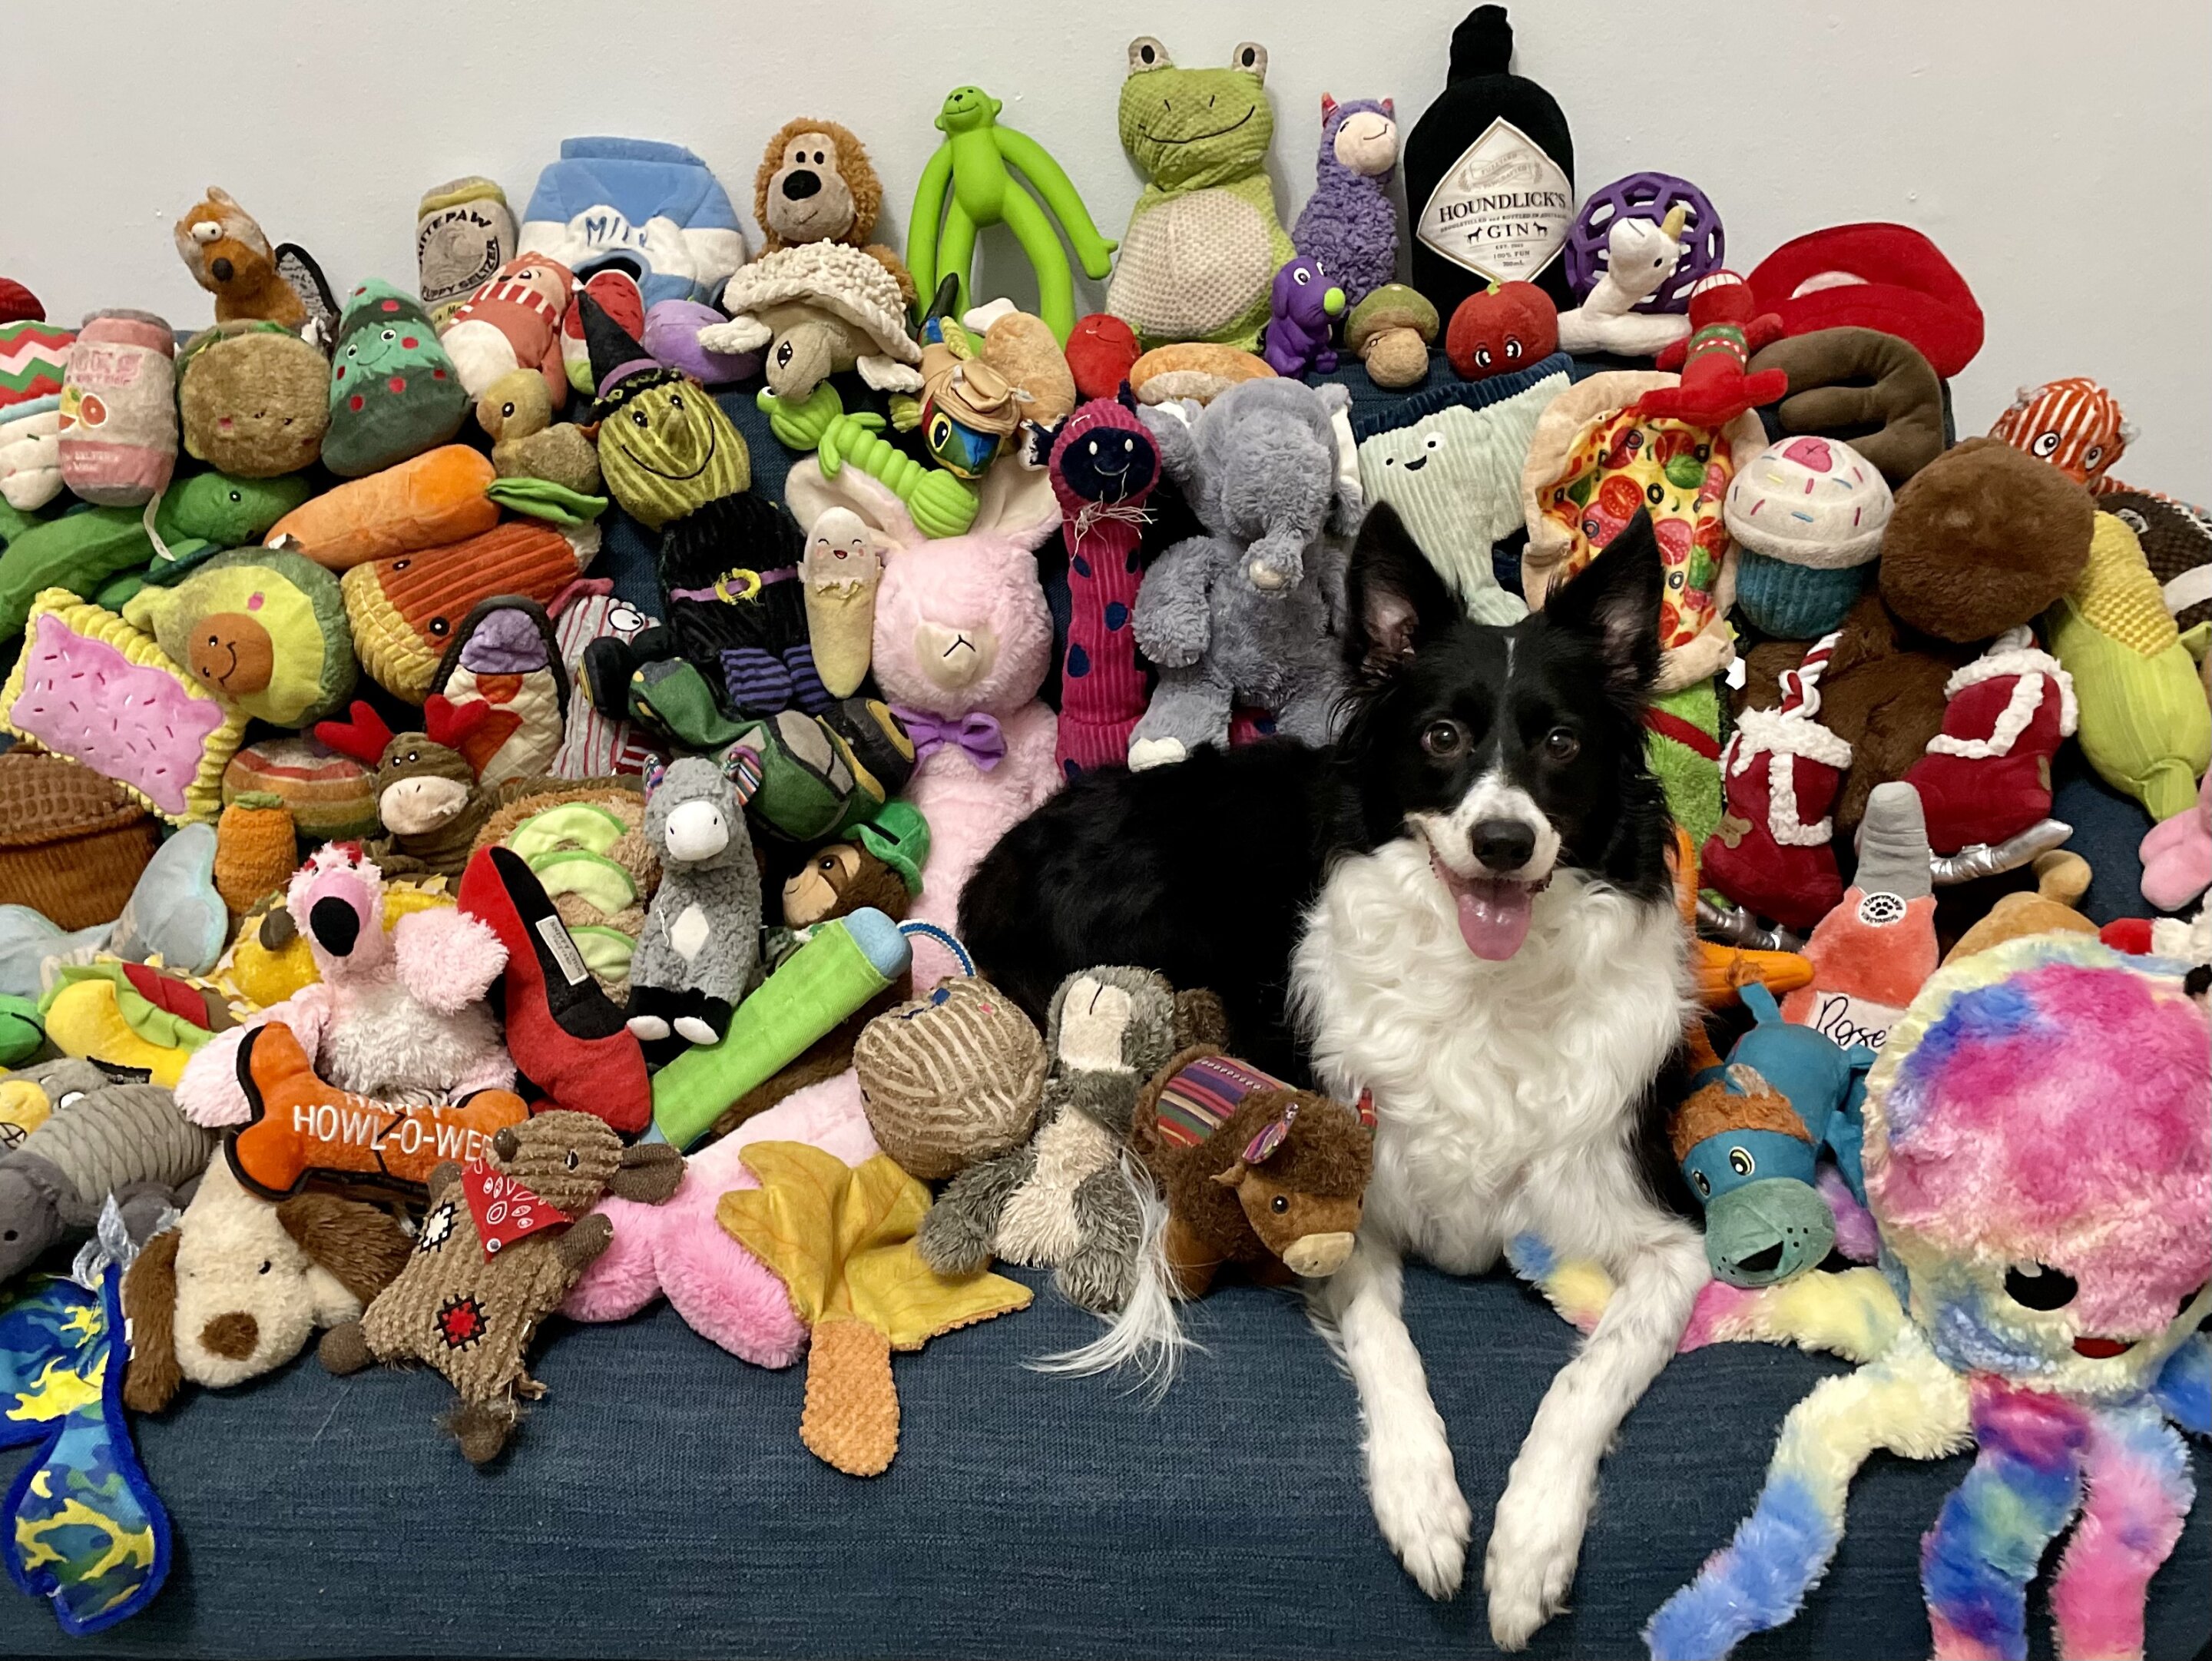 DEMO-SITE - Border Collie - Out of This World Toys - Specialty Toys Network  Demo Site